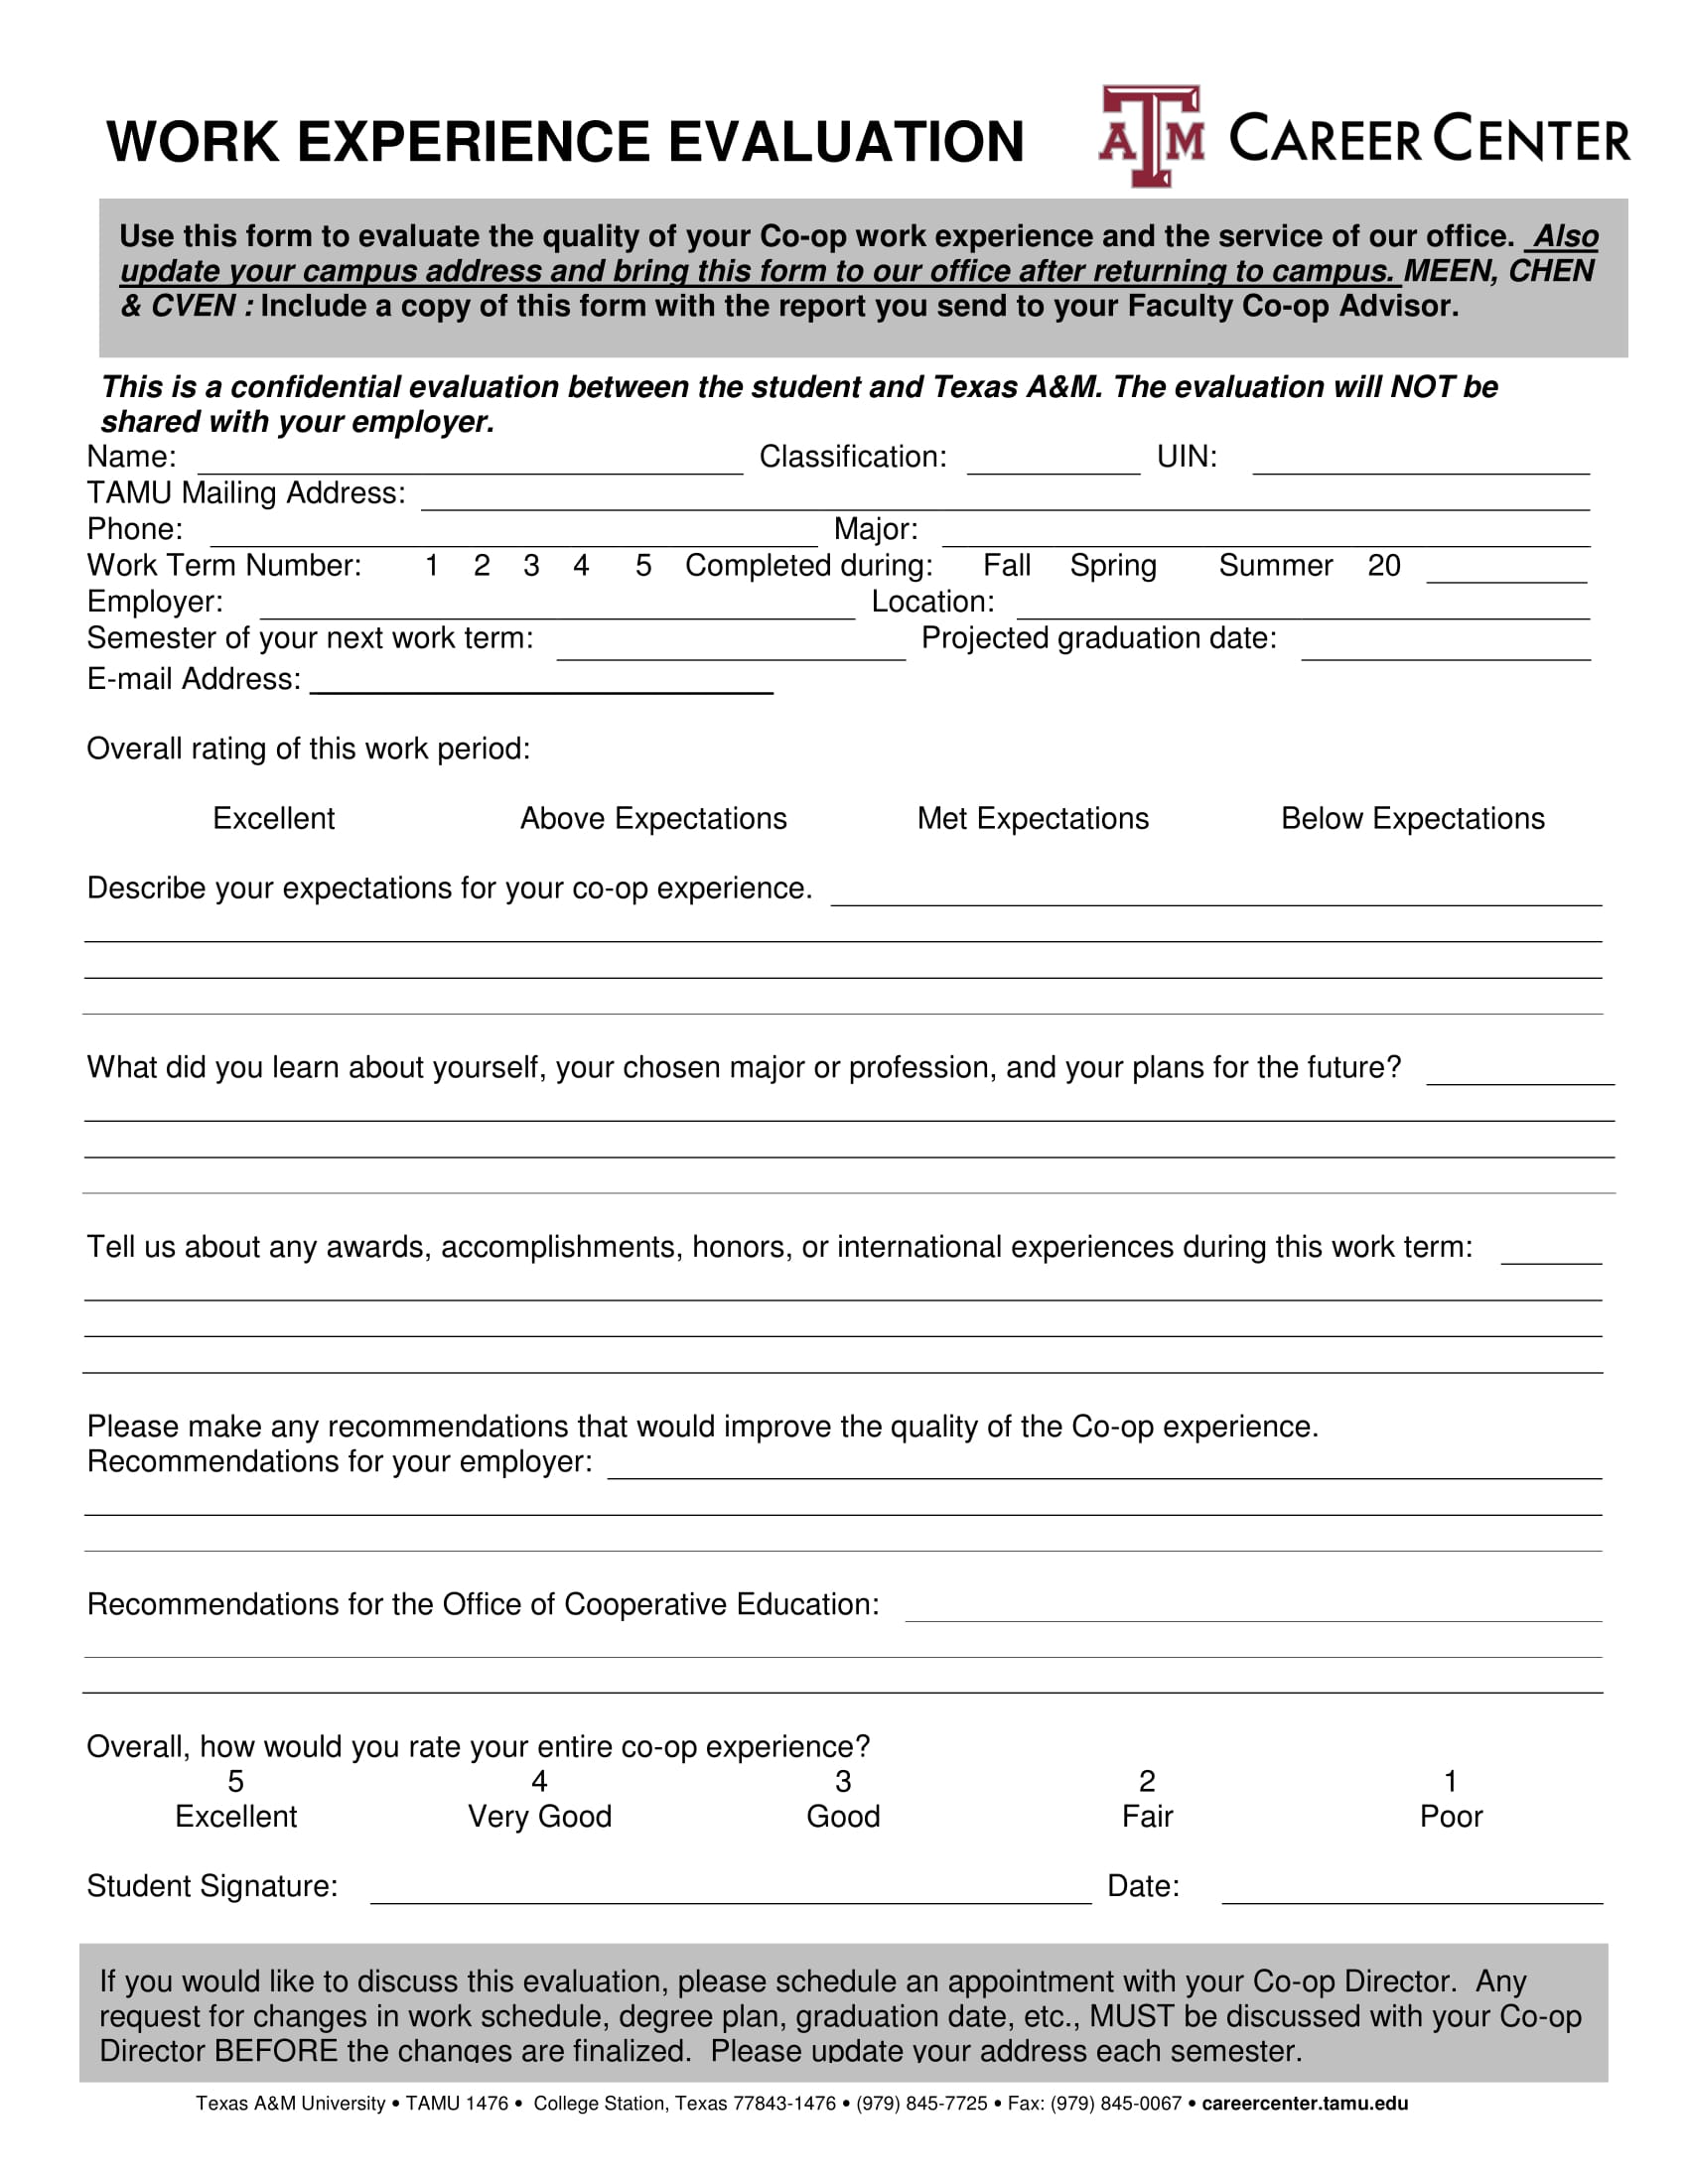 work experience evaluation form 1